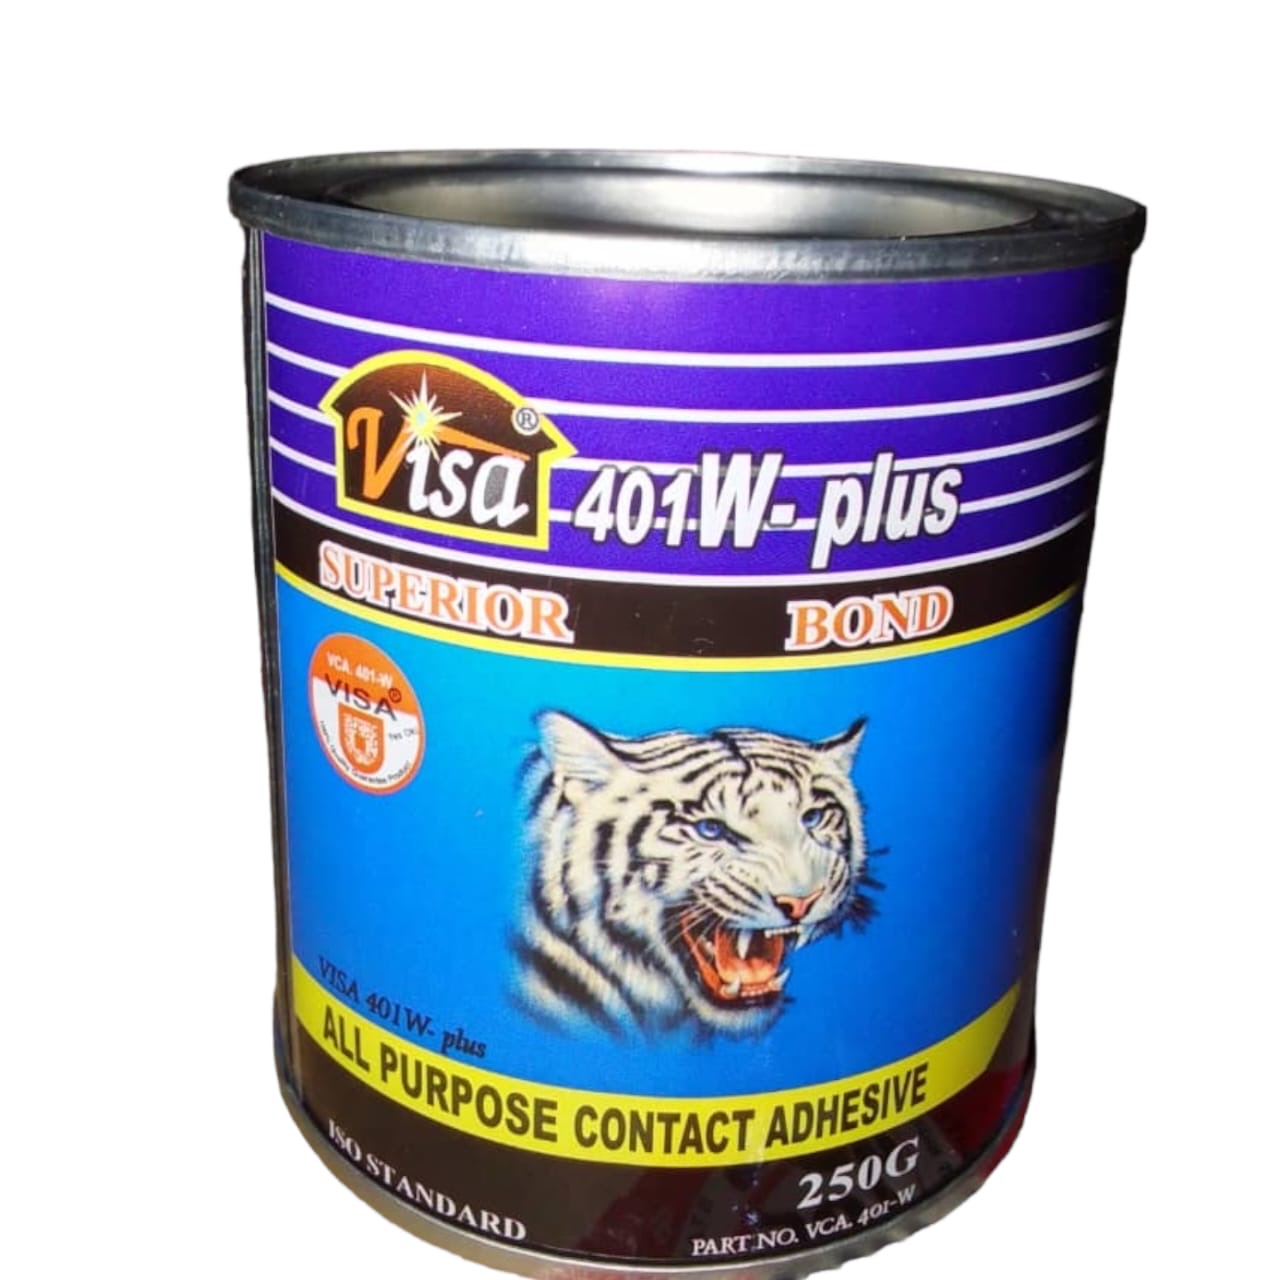 VISA® ALL PURPOSE CONTACT ADHESIVE 404E-S - EXTRA STRONG (1Kg)